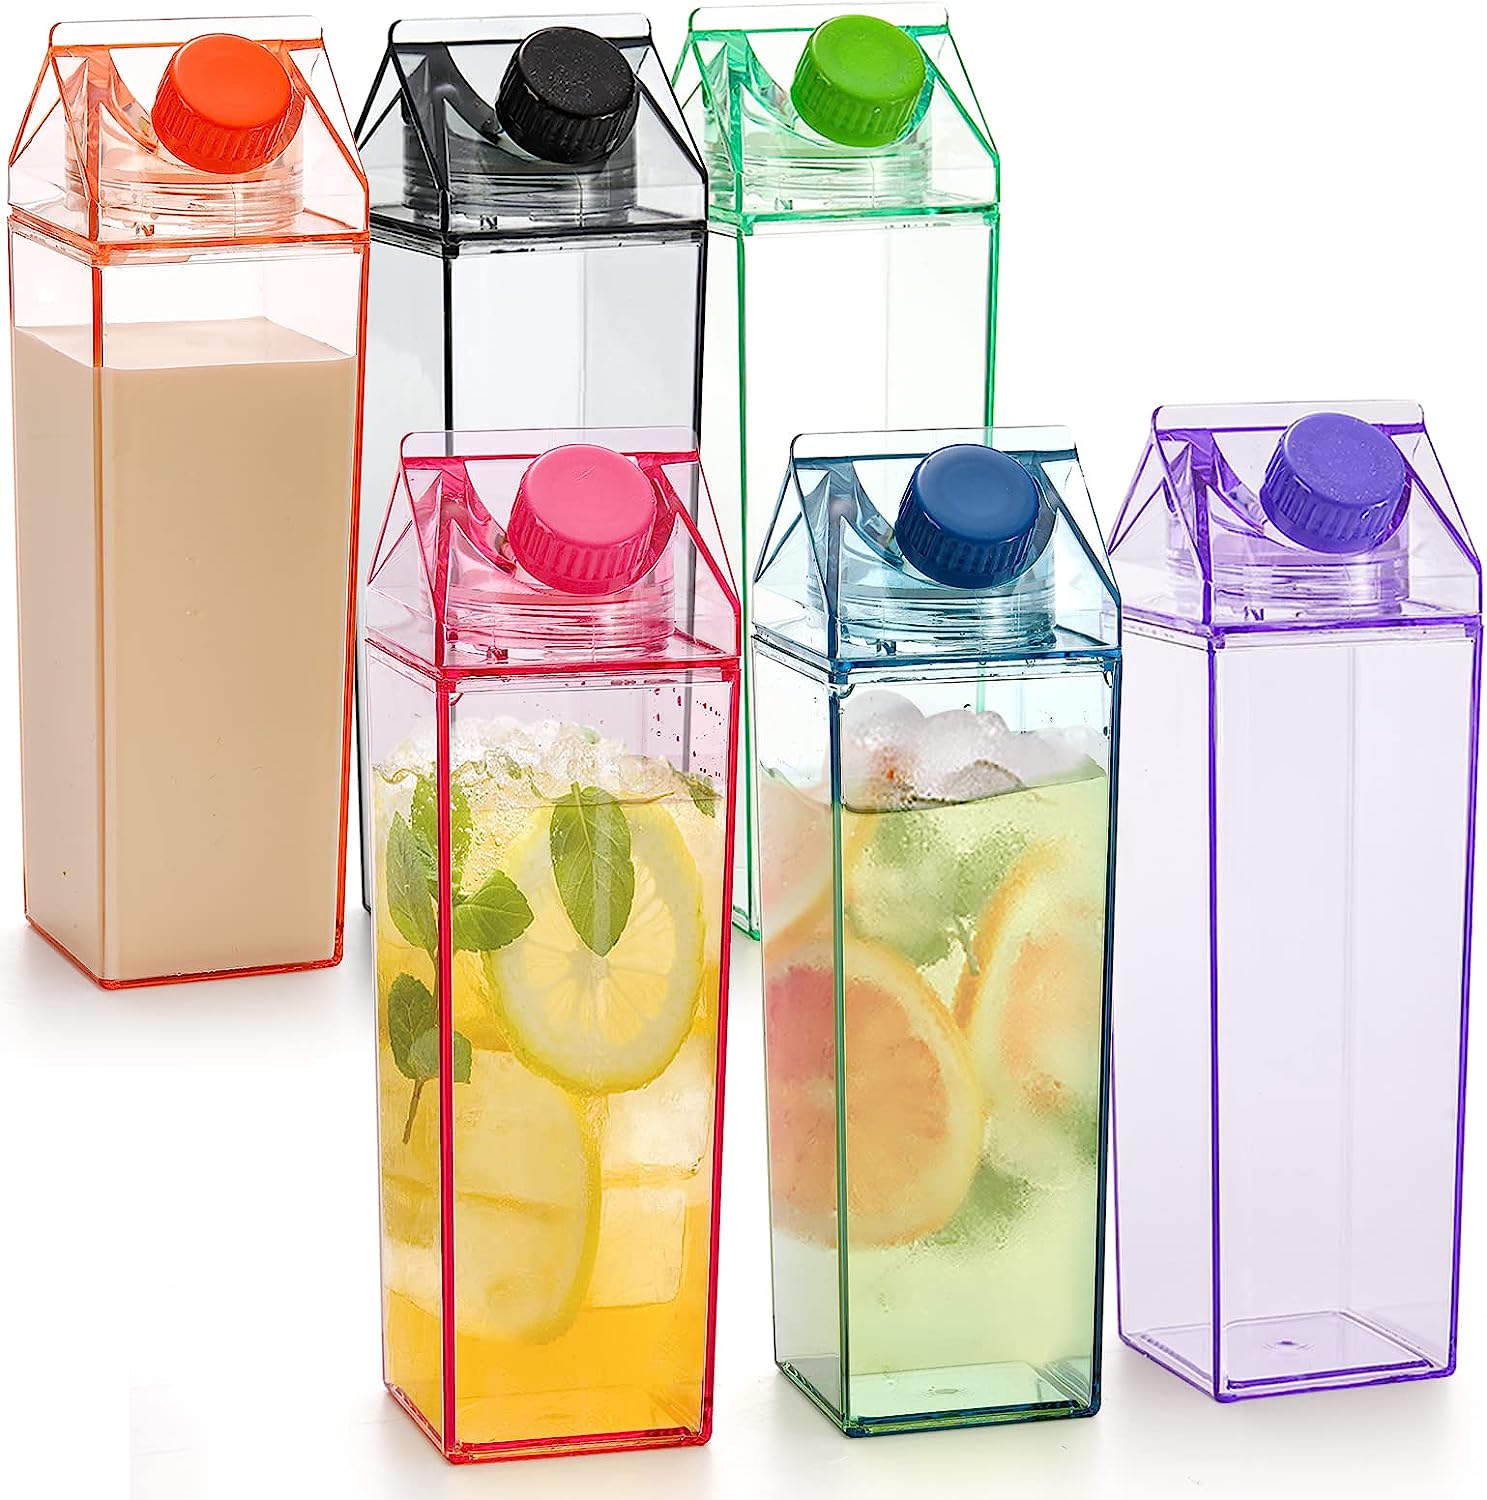 3 Pcs 34 oz Milk Carton Water Bottle Clear Square Milk Bottles Plastic  Coffee Milk Carton Bottle Portable Reusable Milk Carton Cup Leakproof Carton  Shaped Juice Bottle for Outdoor Sports Camping Gym